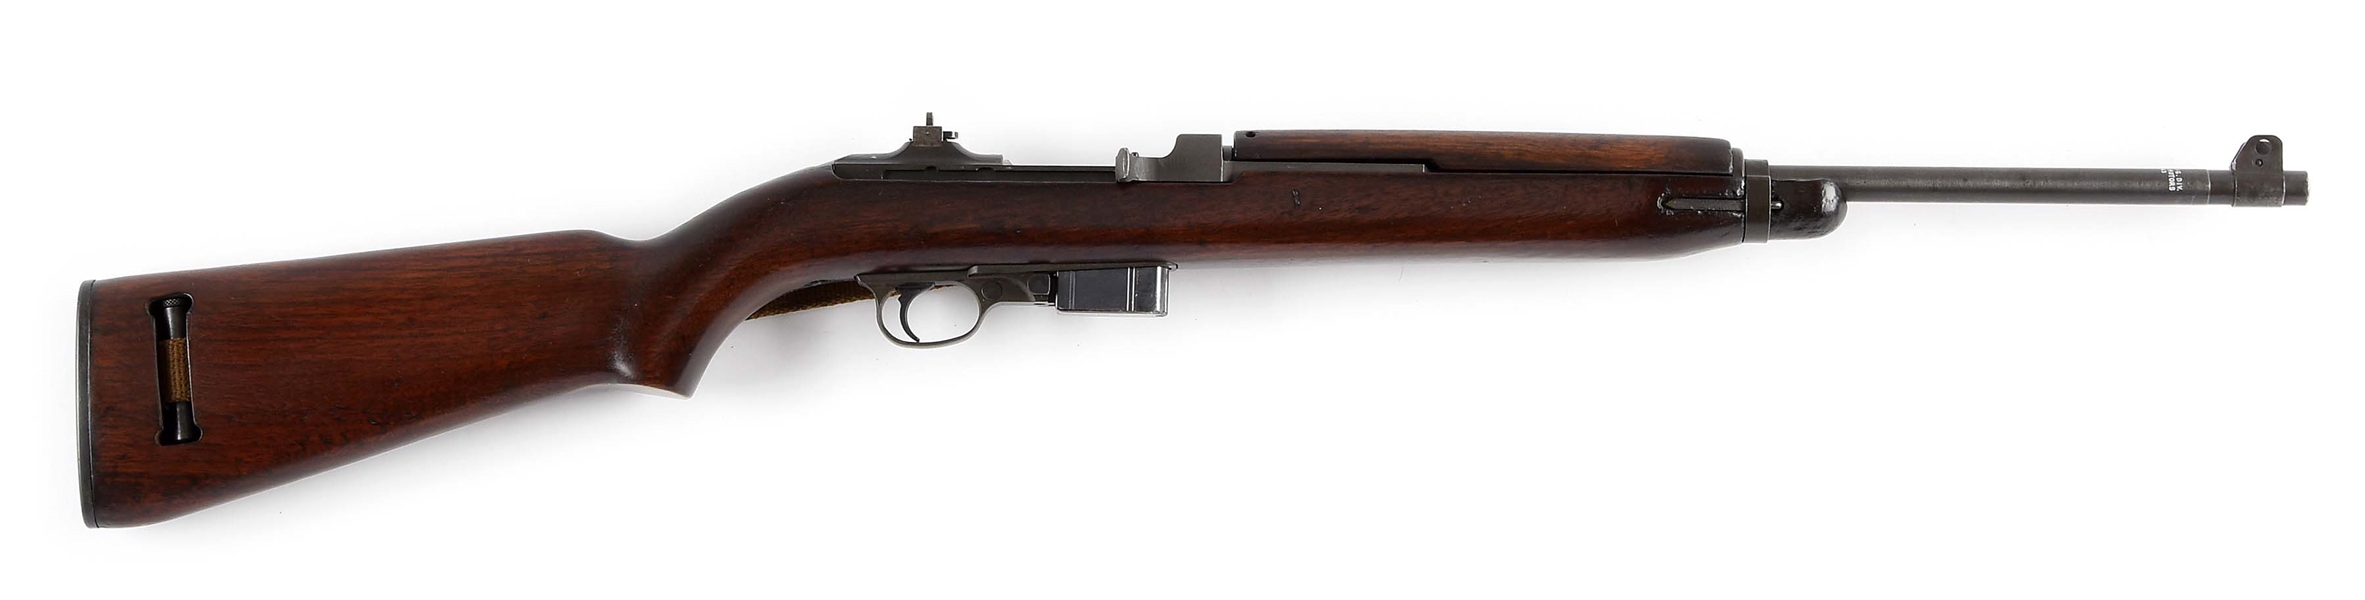 (C) IMPORTANT EXPERIMENTAL OR TEST INLAND M1 CARBINE.